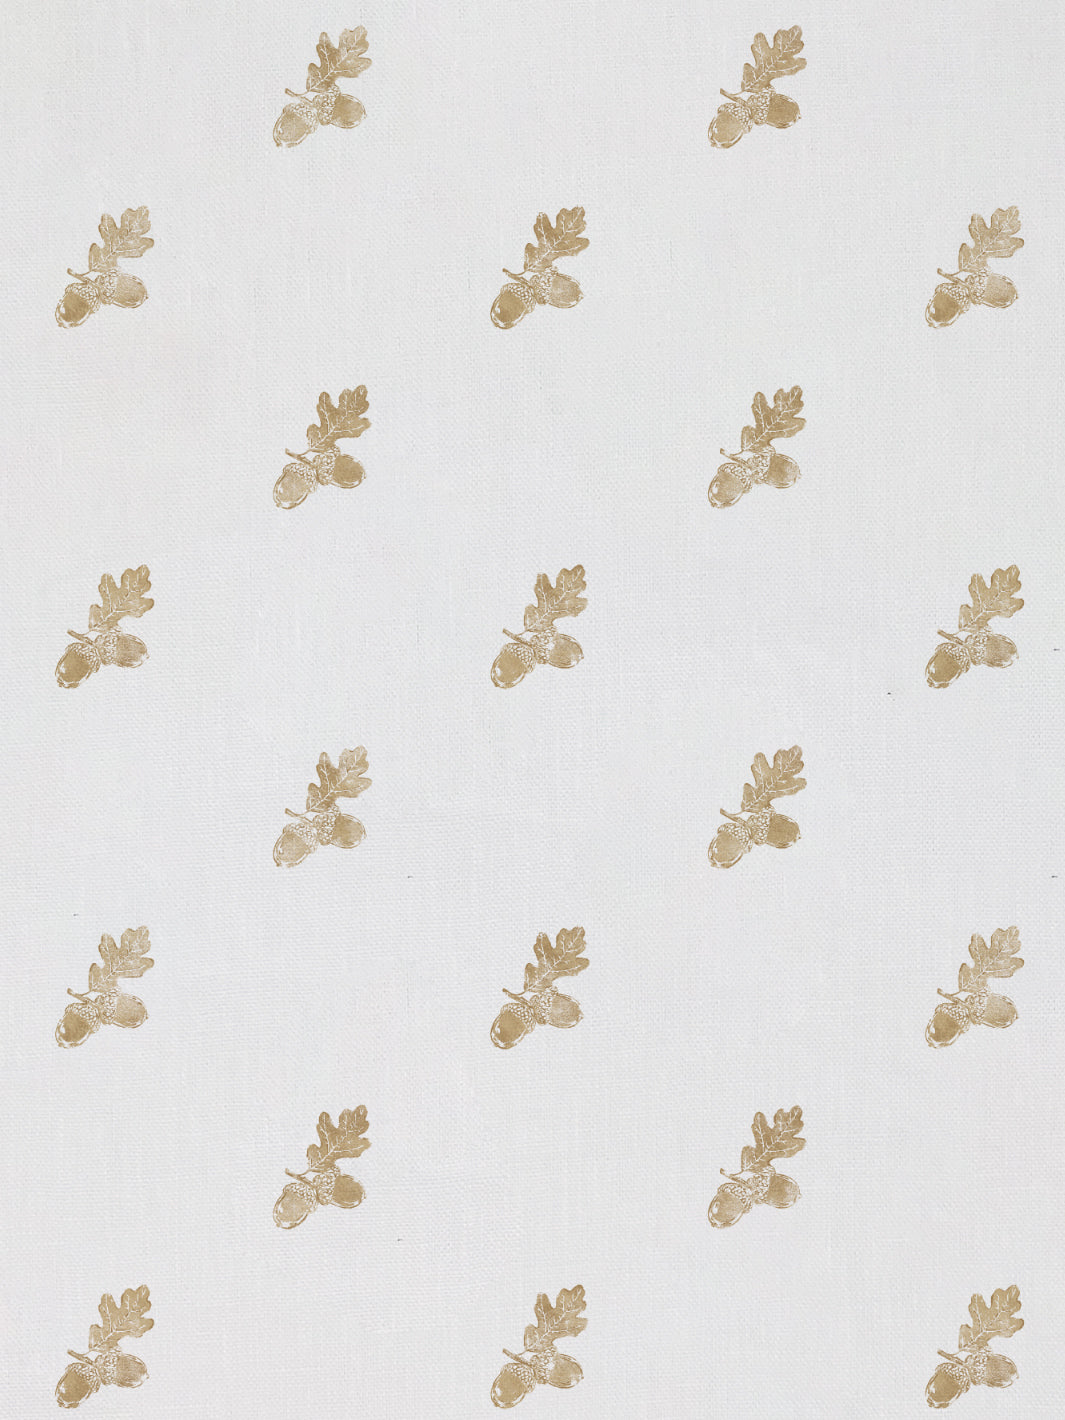 'Valley Acorn' Linen Fabric by Nathan Turner - Gold